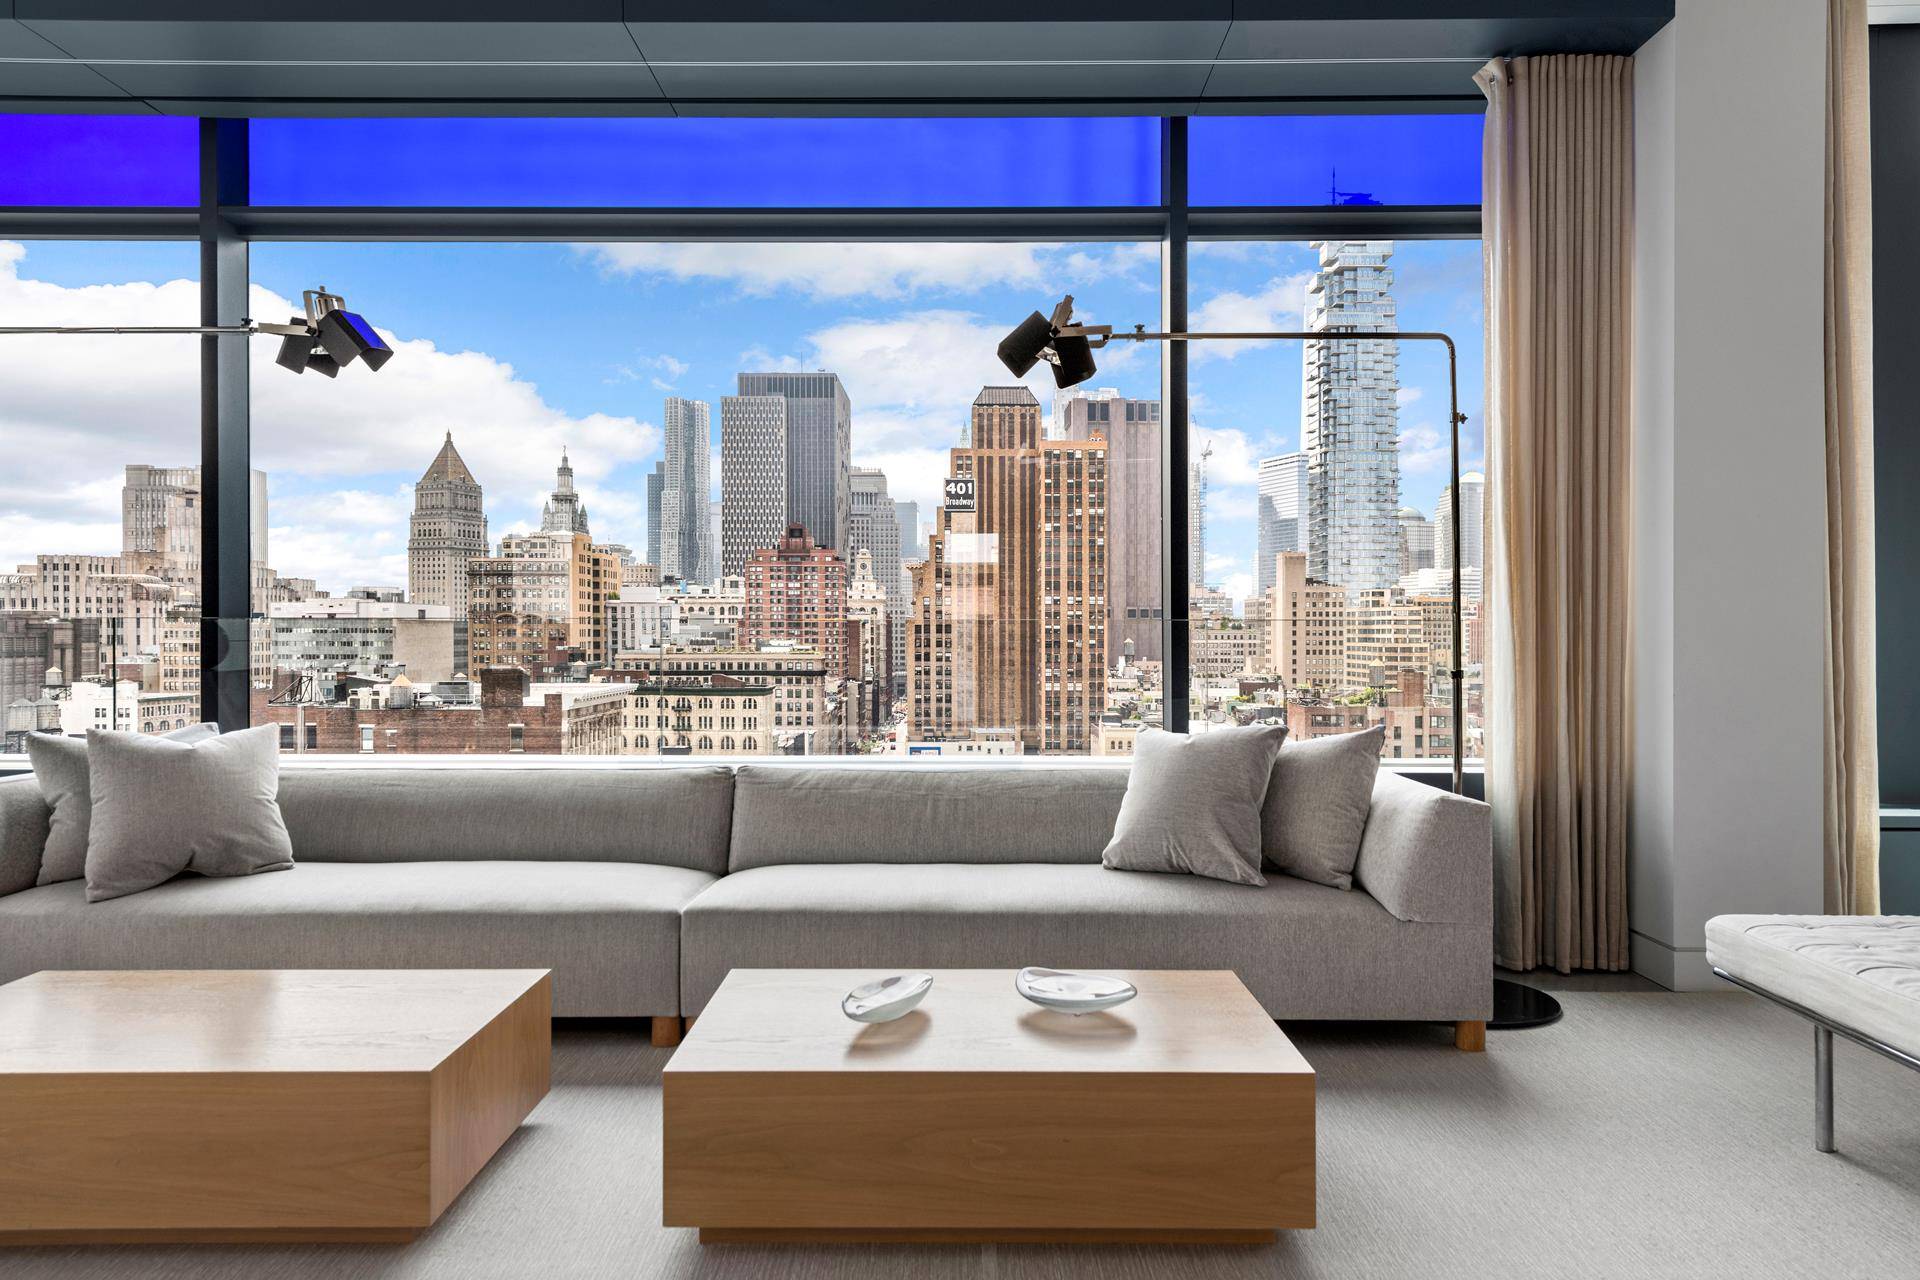 MASTERPIECE IN THE SKY Immersed in natural light like no other home, this stunning glass roof penthouse possesses spectacular floor to ceiling windows that provide unrivaled views of the city ...